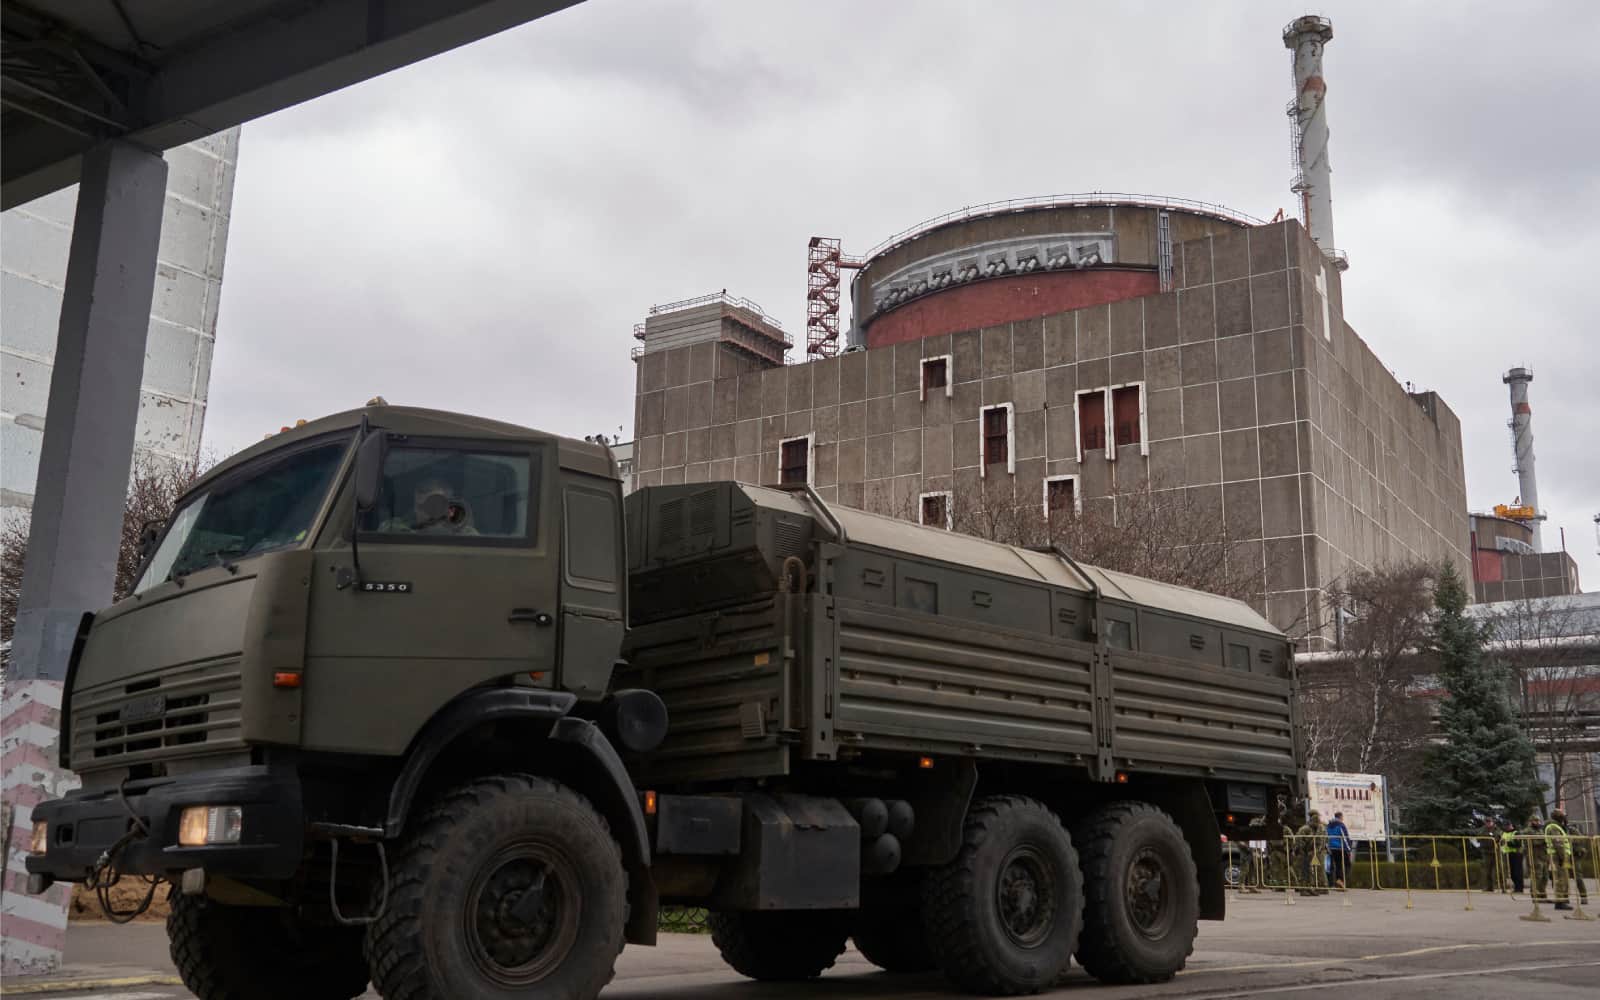 How Zaporizhzhia Nuclear Power Plant is falling apart and world is ignoring danger